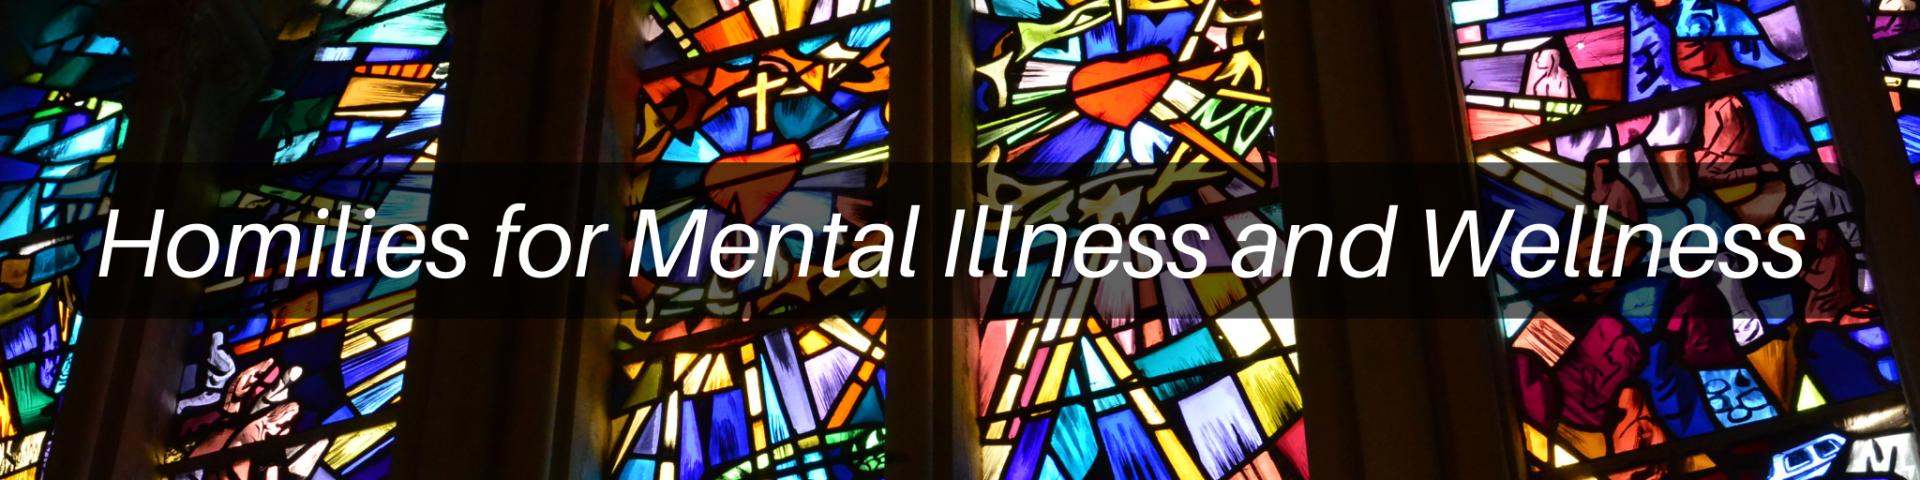 Homilies for Mental Illness and Wellness 